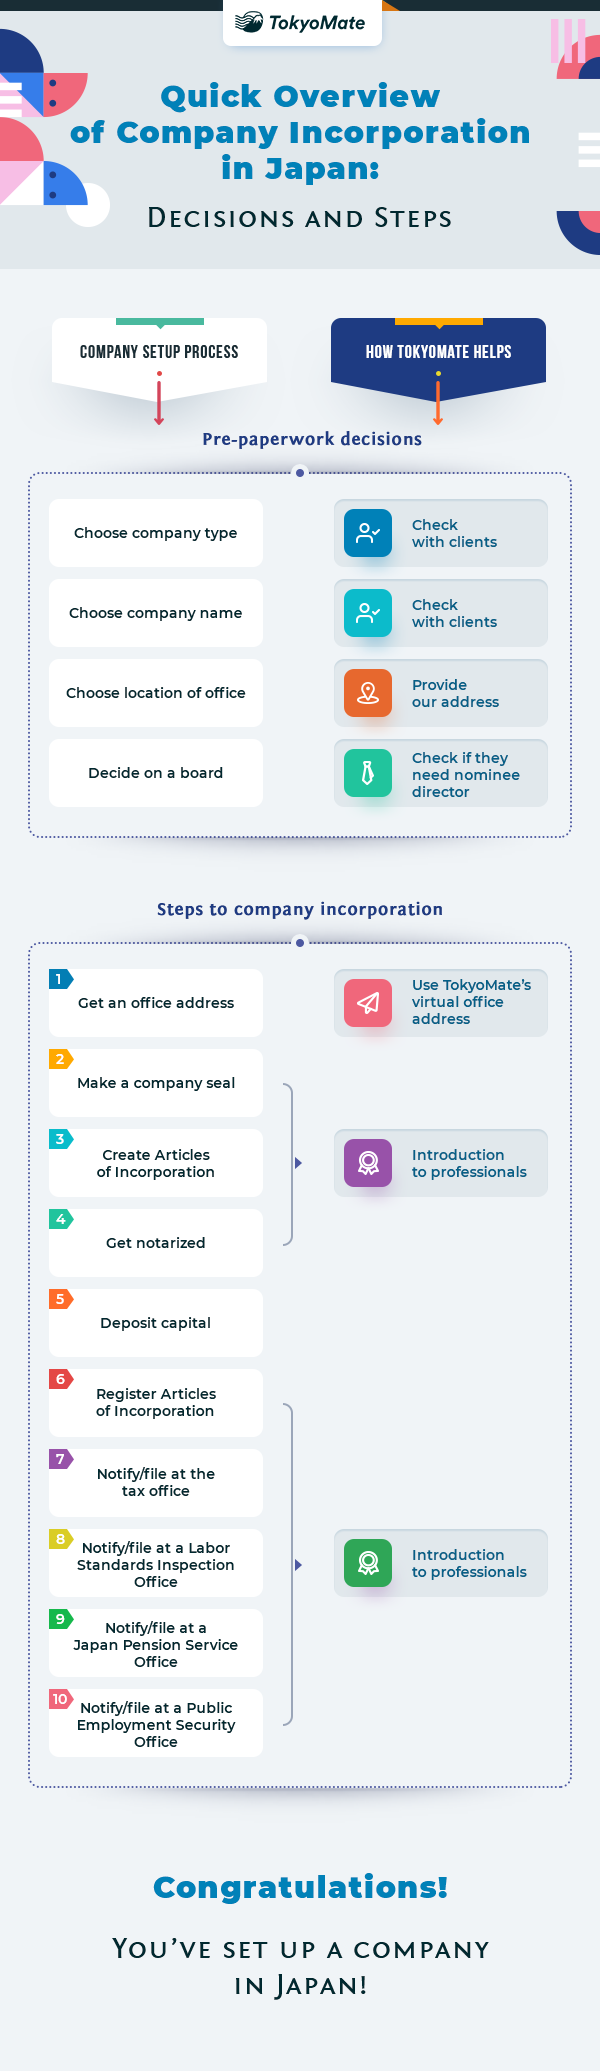 Quick Overview of Company Incorporation in Japan 